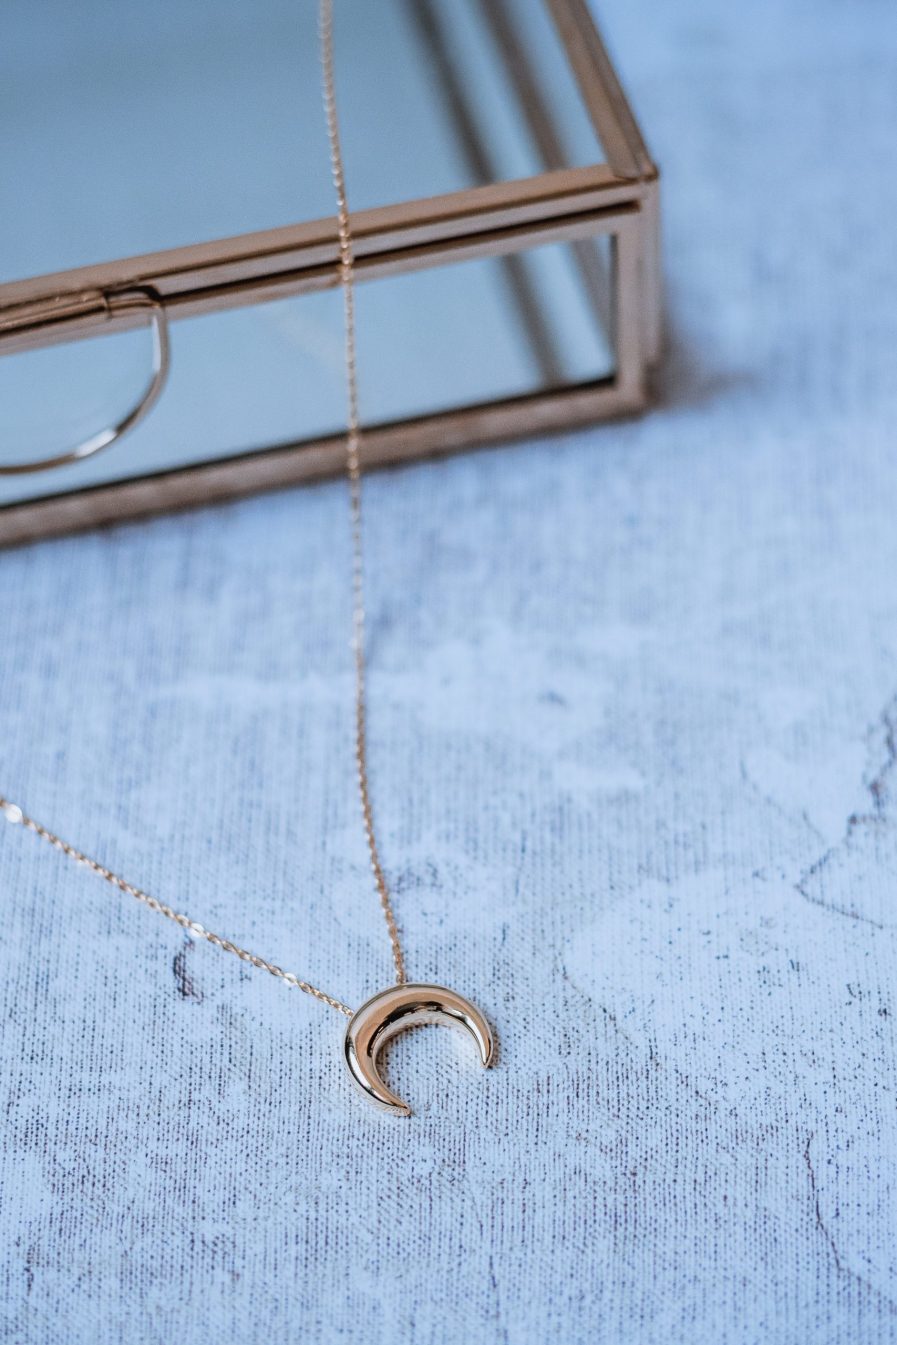 925 Sterling Silver Smooth Moon Minimalist Necklace